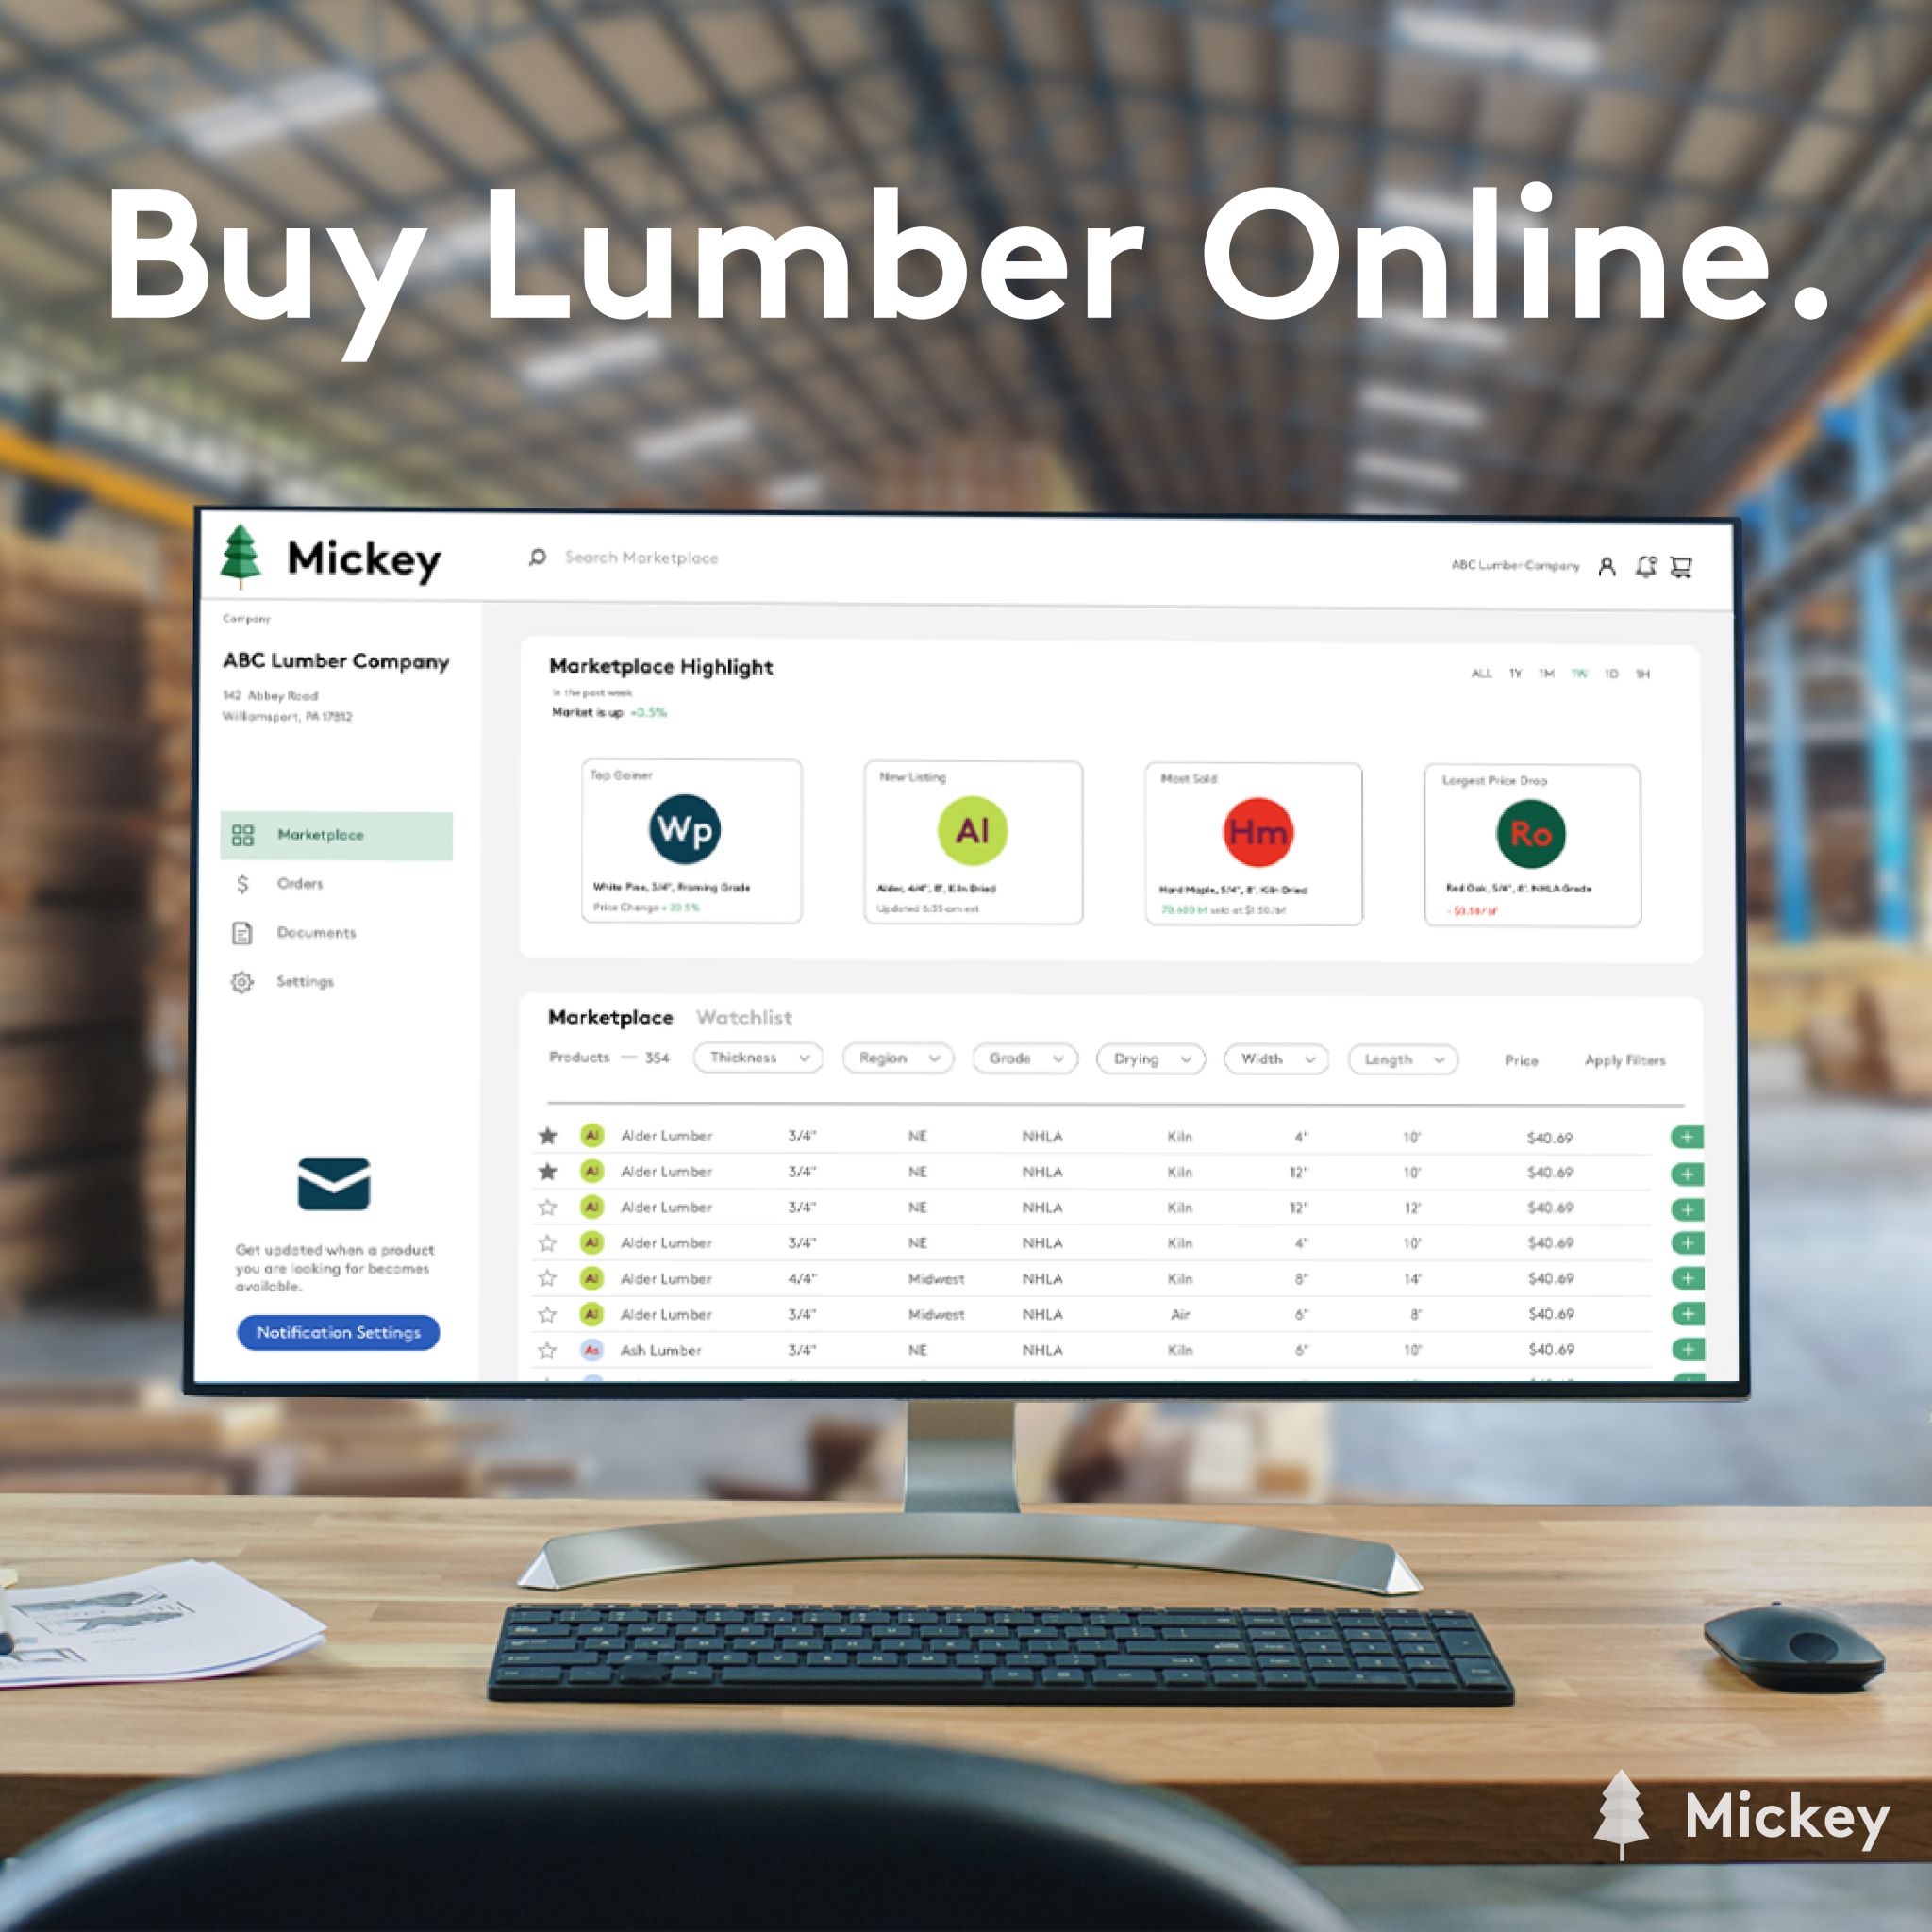 The Mickey Marketplace gives hardwood lumber suppliers a place to sell and market their inventory to a variety of buyers across the United States.